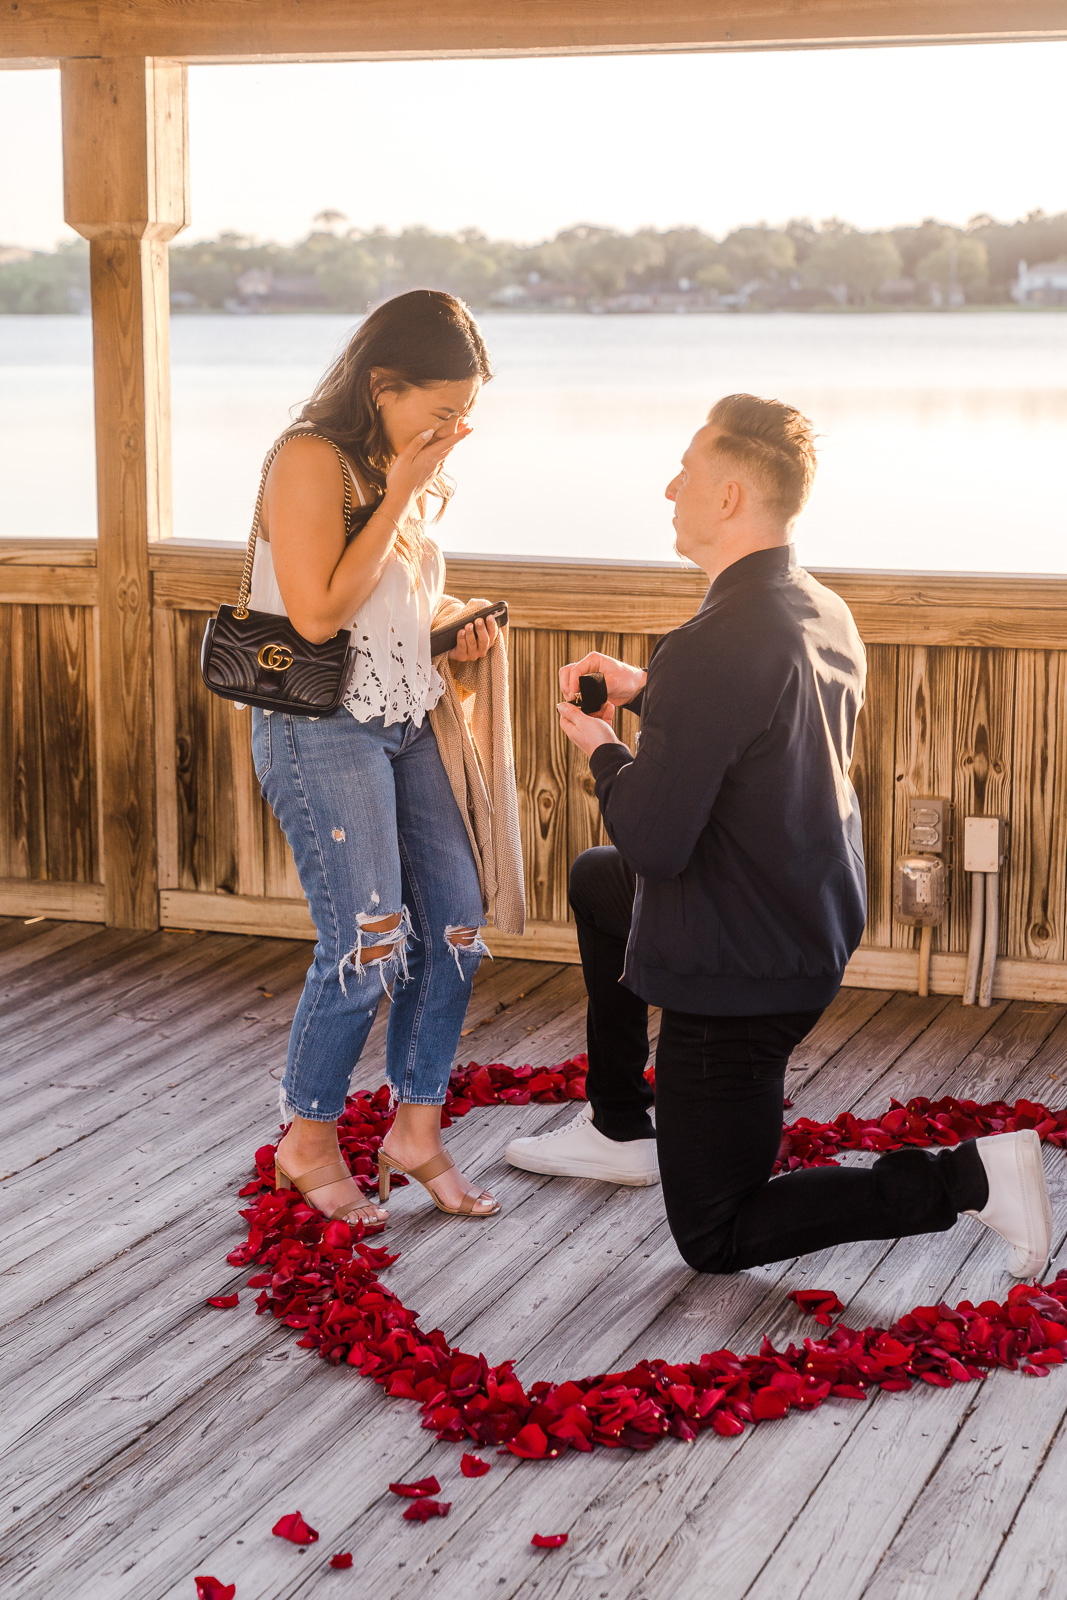 Surprise proposal photographer in Orlando captures engagement at Enzo's on the Lake in central Florida